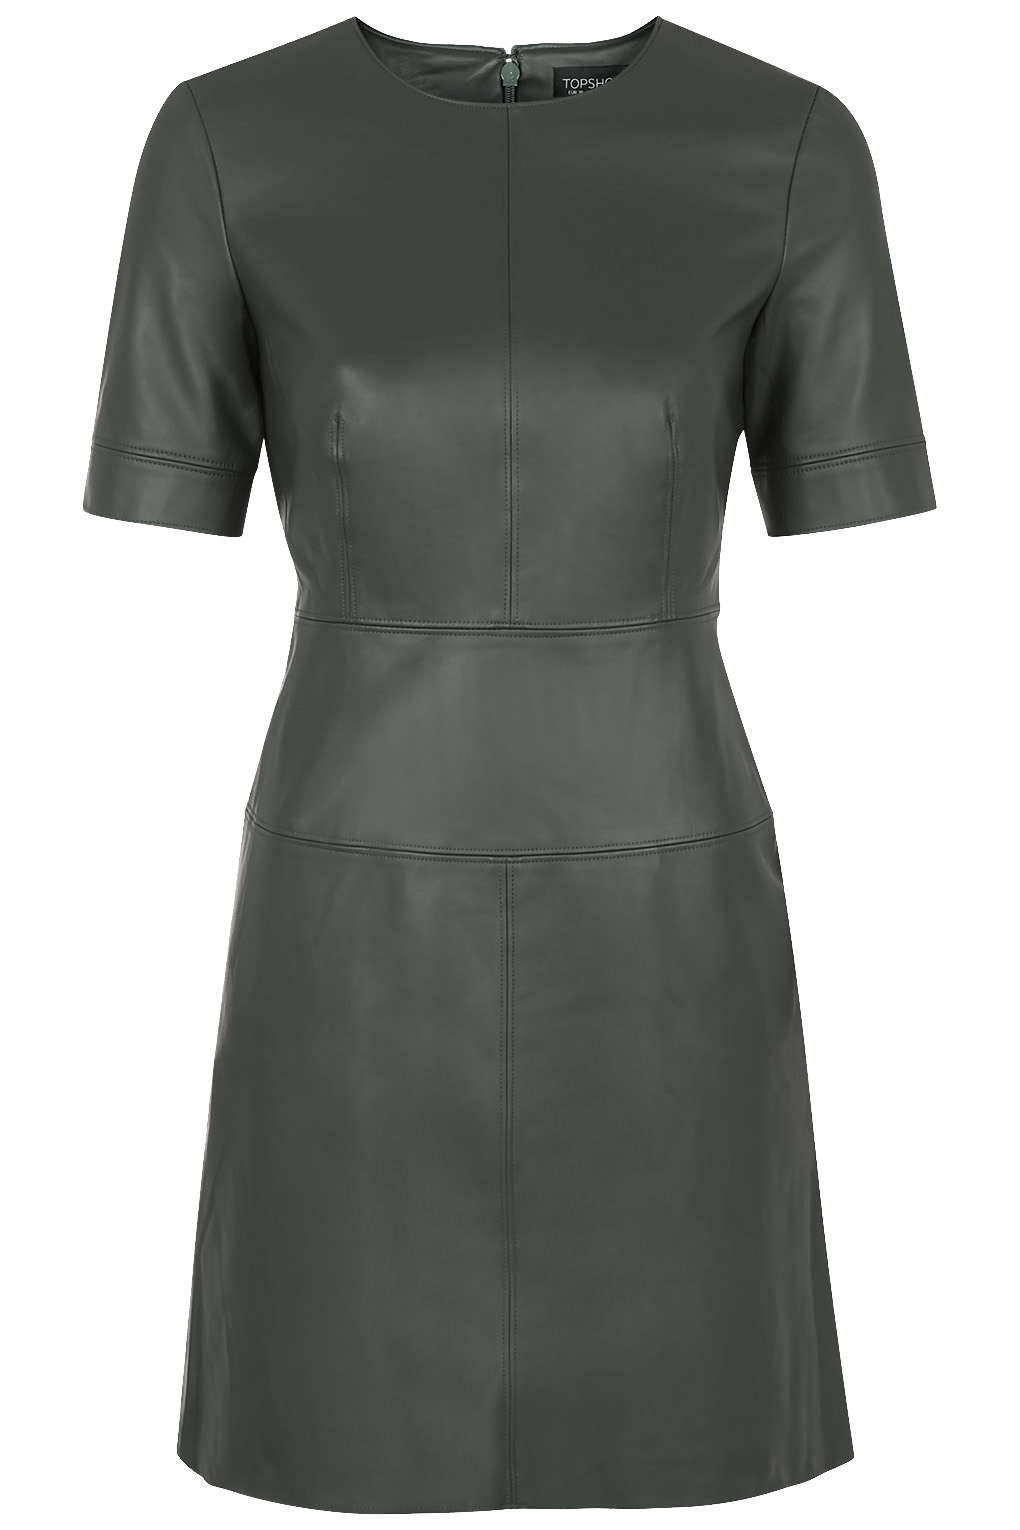 Topshop Faux Leather Shift Dress in Green — UFO No More